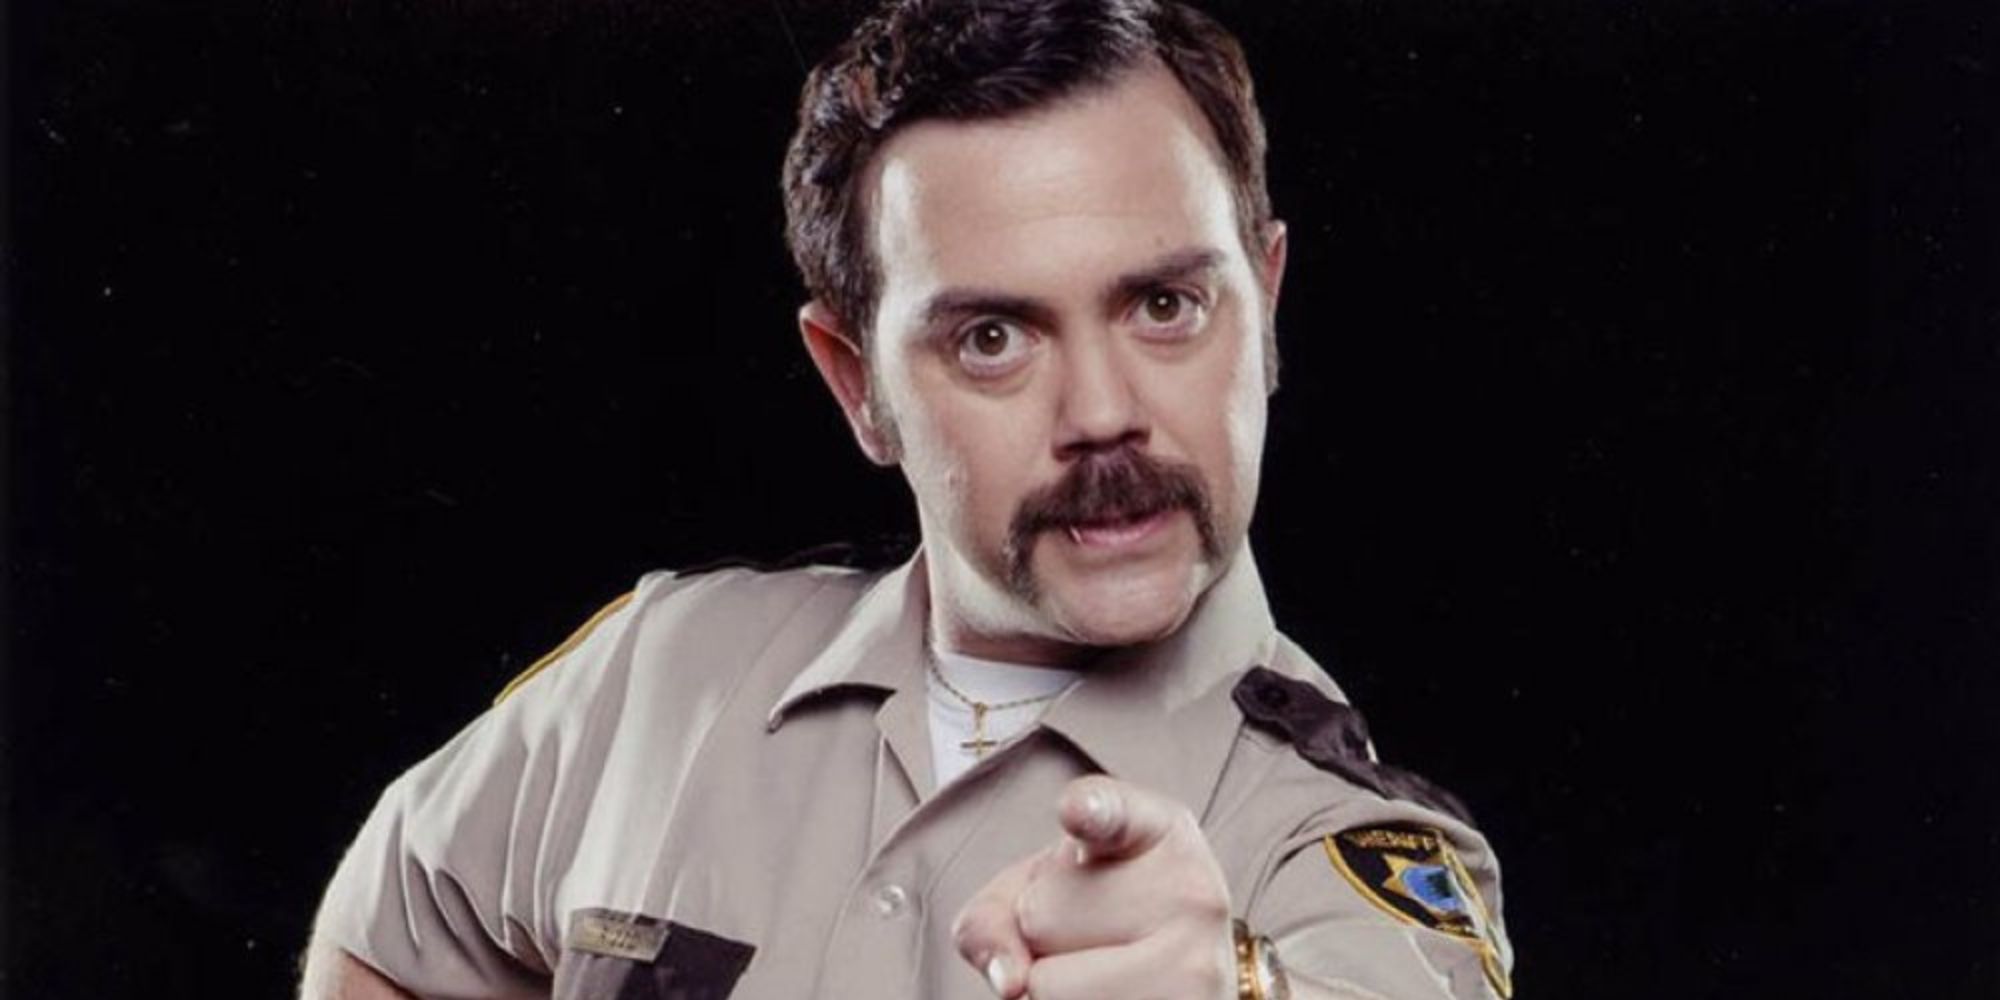 Joe Lo Truglio from Reno 911 pointed to the screen